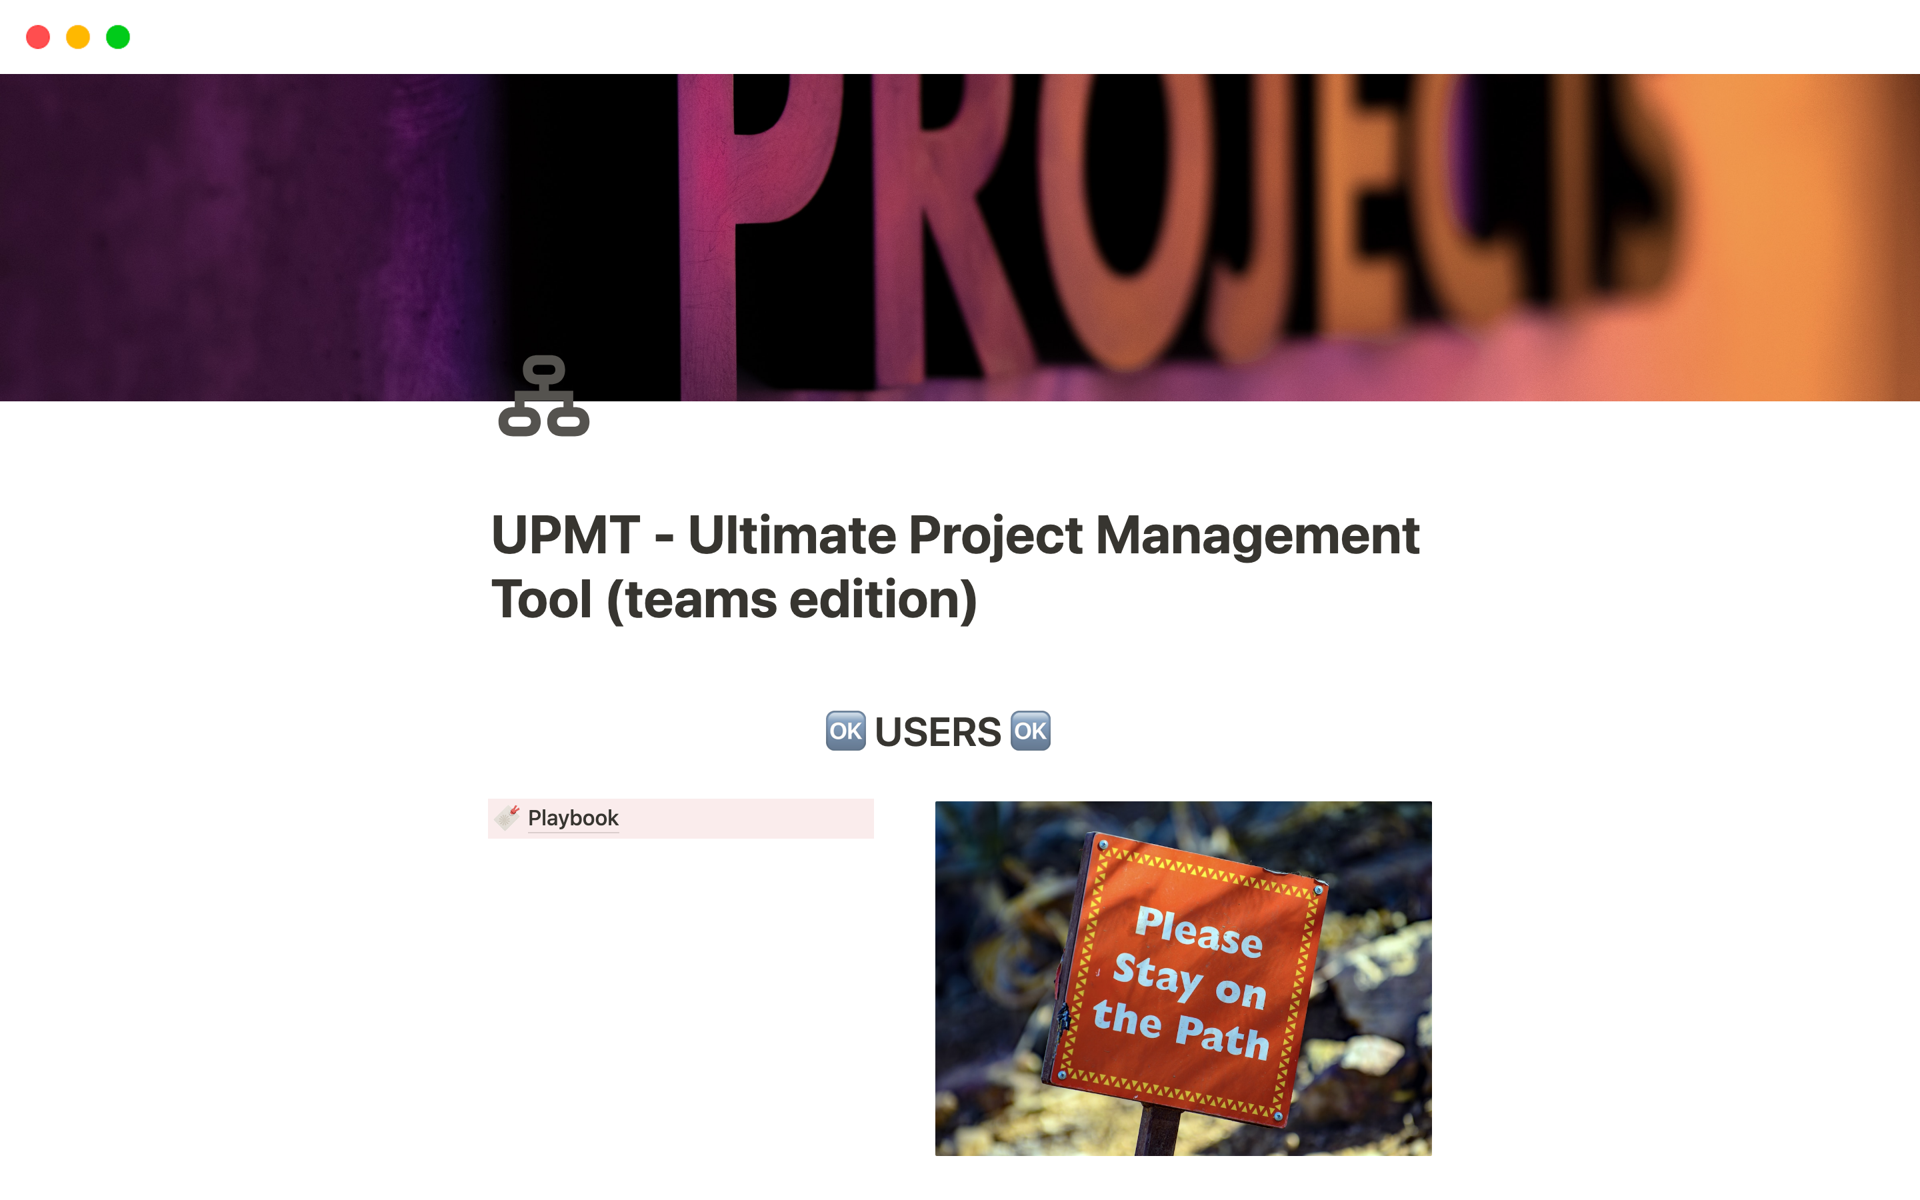 UPMT - Ultimate Project Management Tool (teams edition)